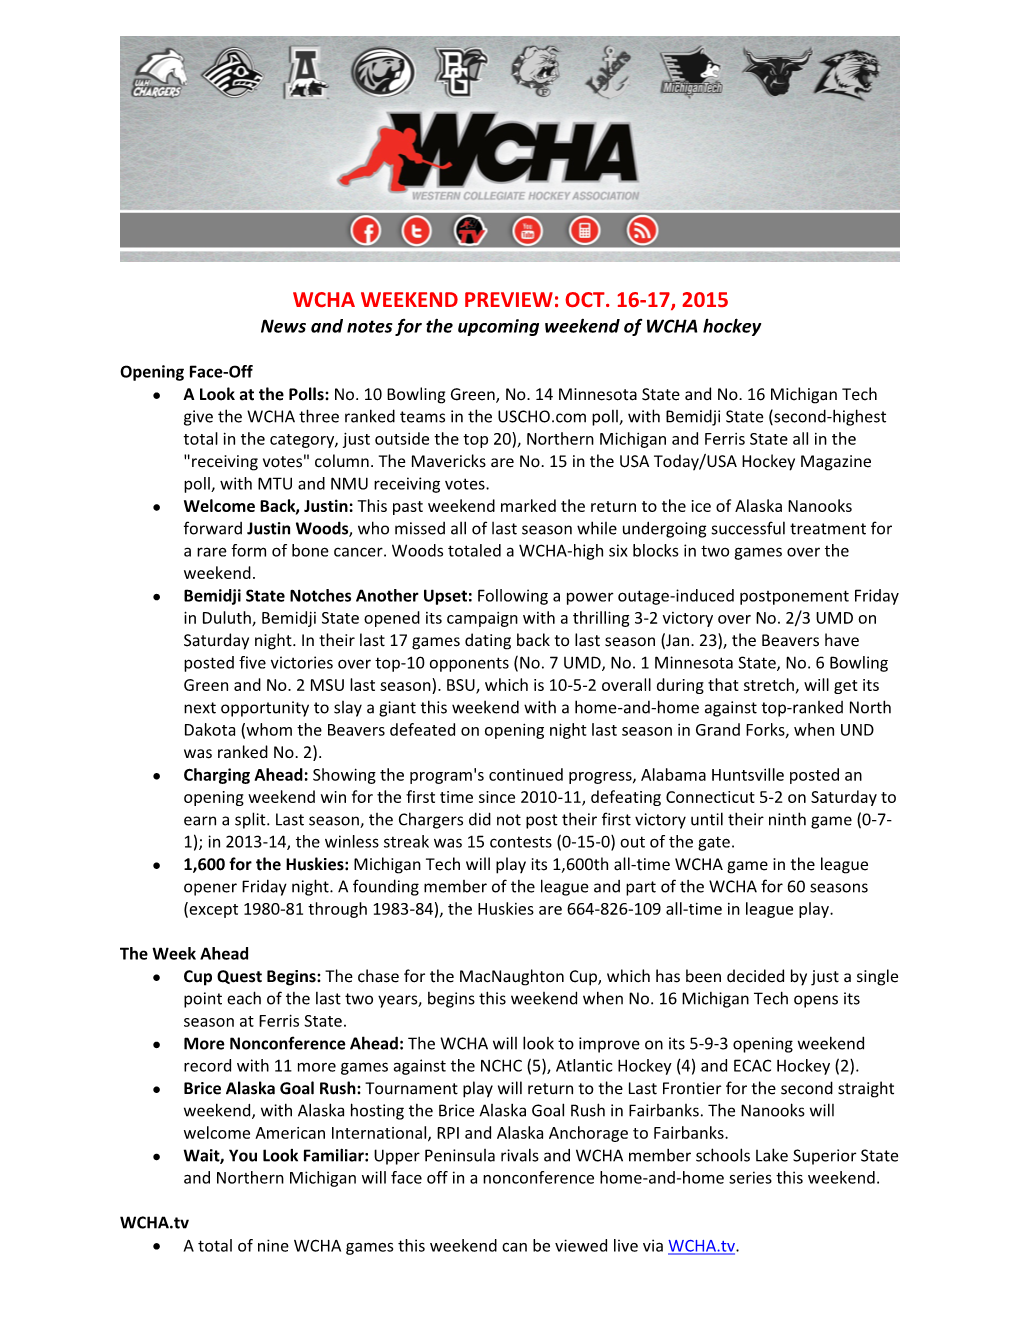 WCHA WEEKEND PREVIEW: OCT. 16-17, 2015 News and Notes for the Upcoming Weekend of WCHA Hockey